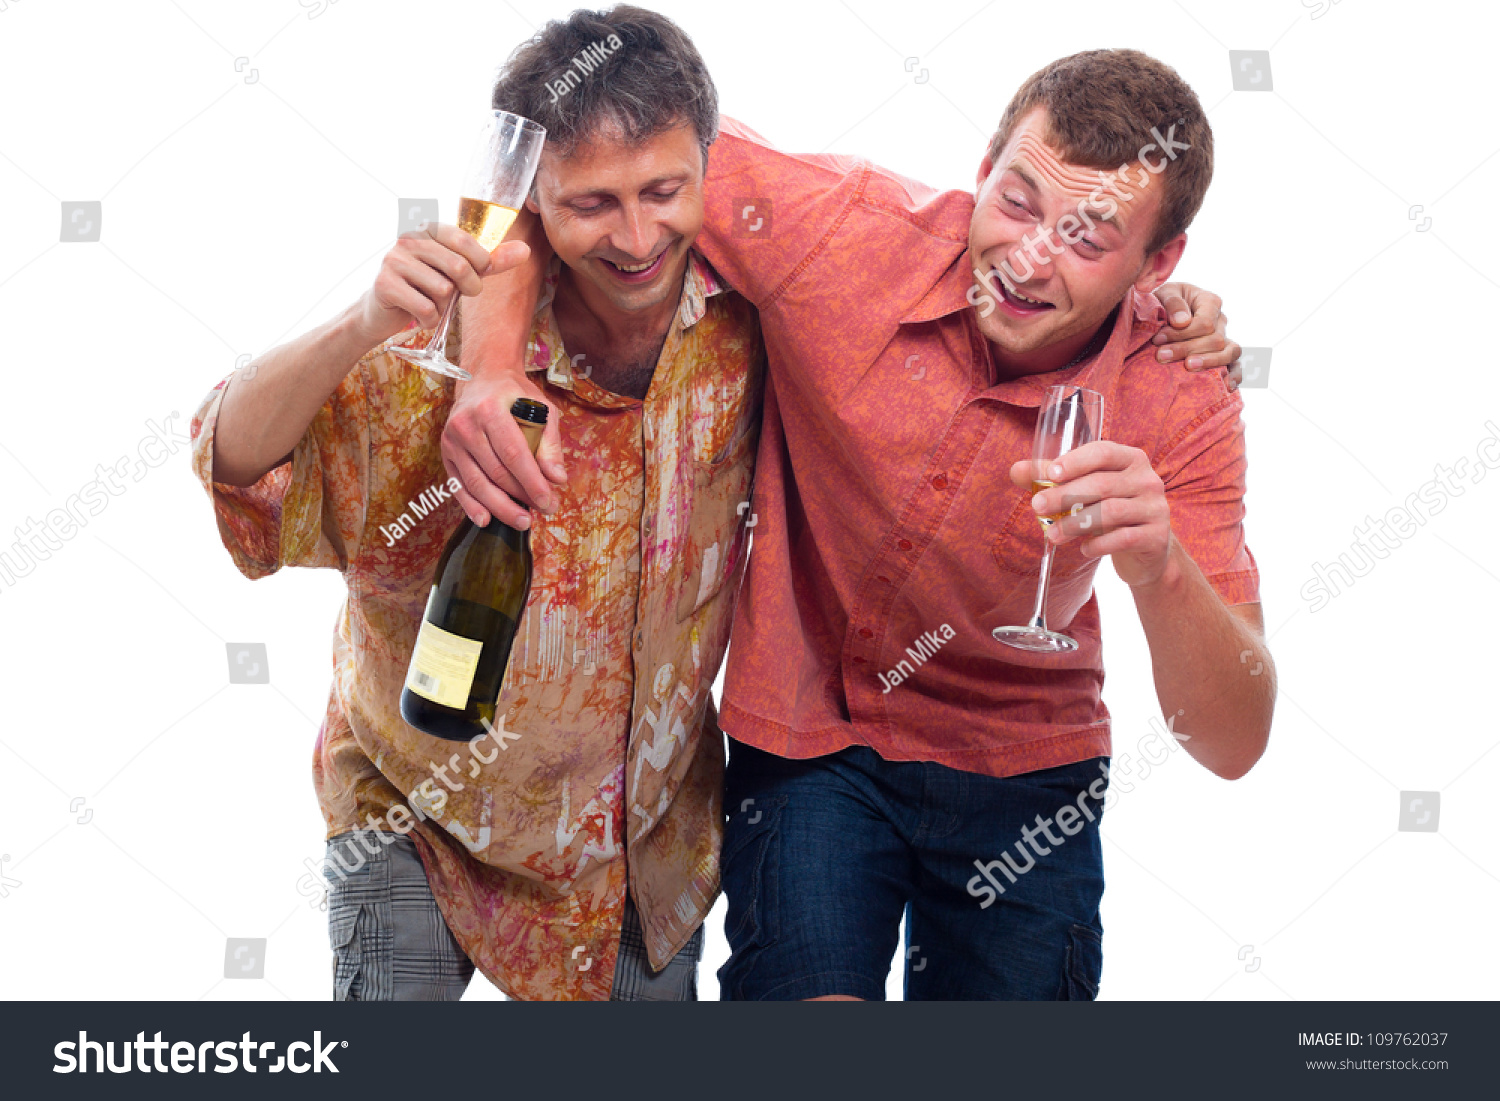 Two Happy Drunken Men With Bottle And Glass Of Alcohol, Isolated On ...